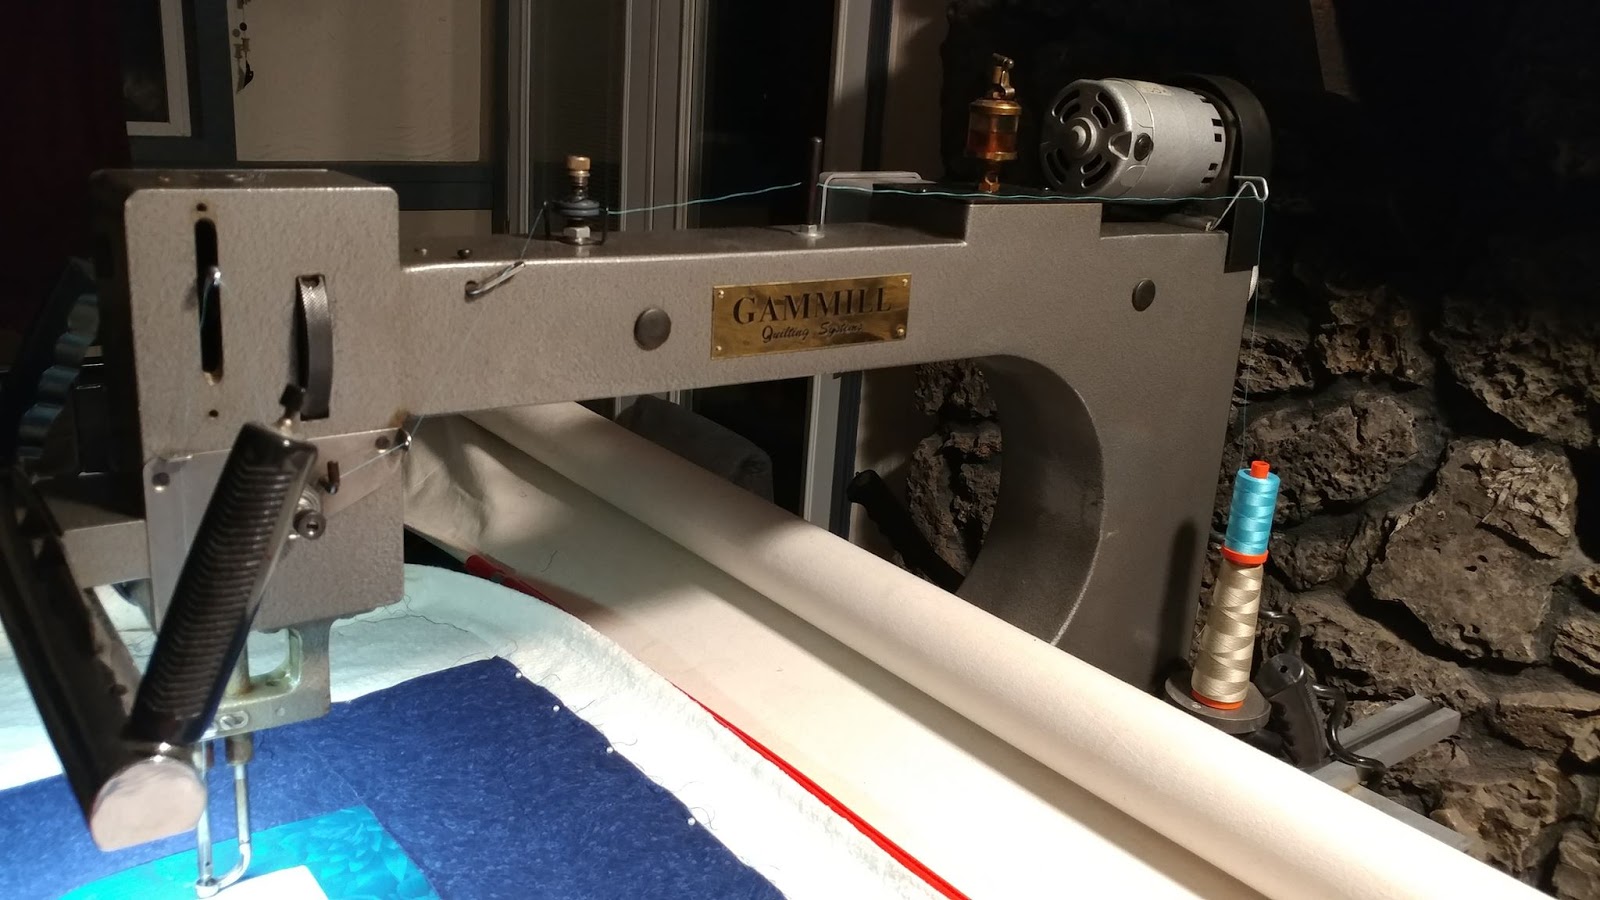 Slice of Pi Quilts: Quilting Dream Come True: I Bought a Longarm!